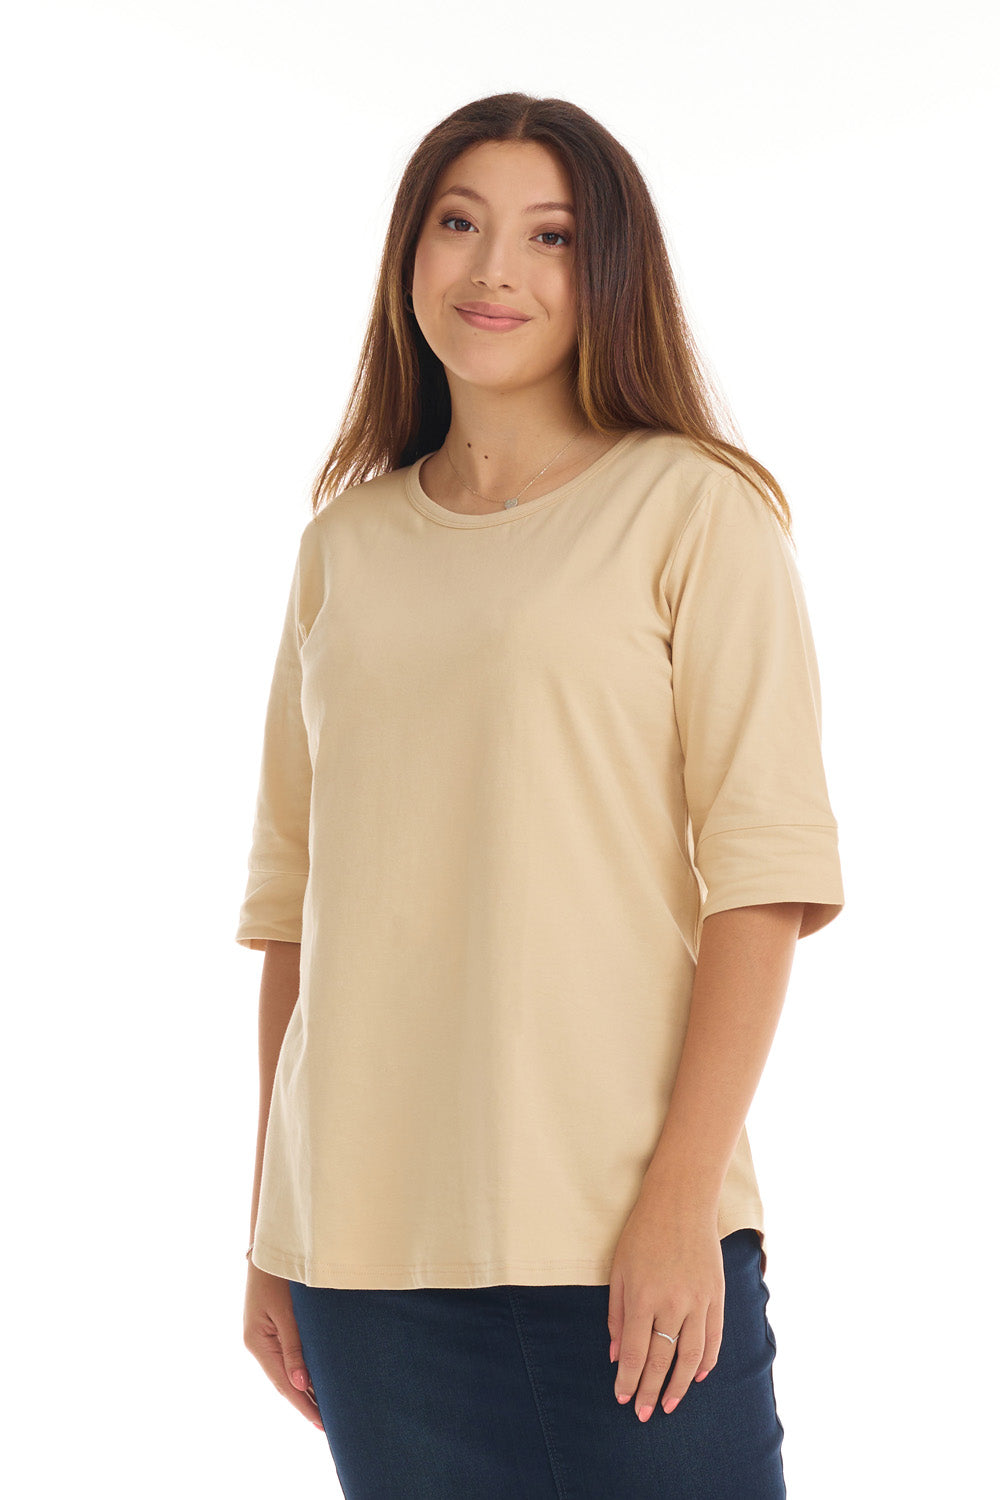 nude color elbow sleeve shirt with cuff sleeve